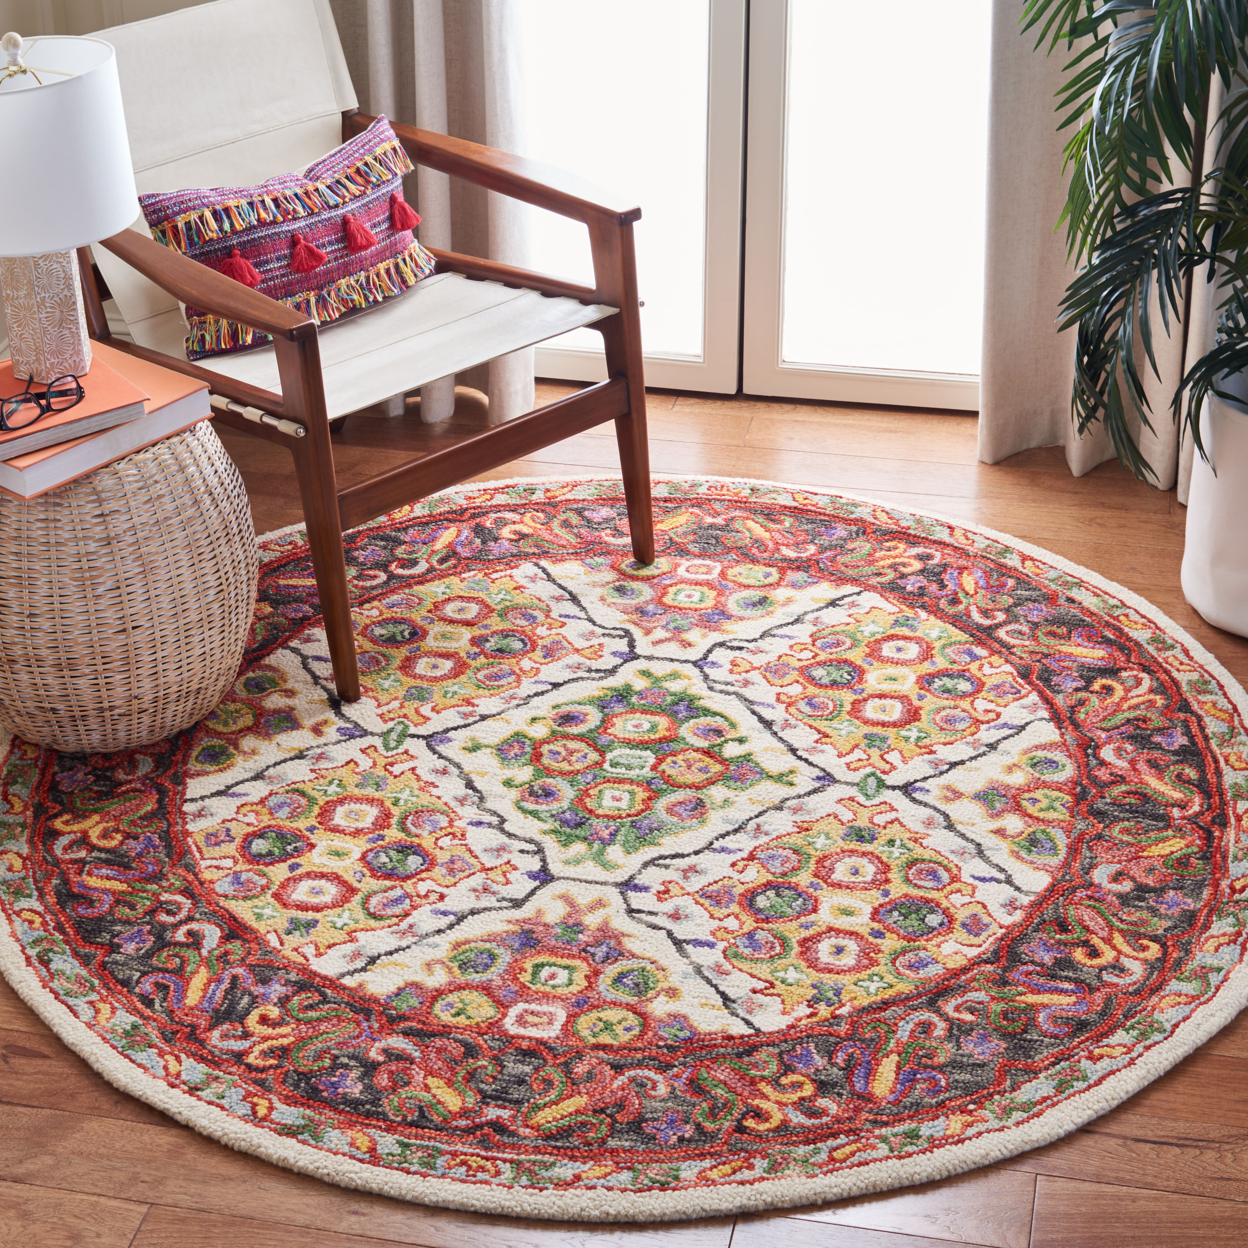 SAFAVIEH Trace Collection TRC524A Handmade Ivory/Red Rug - 6' Round